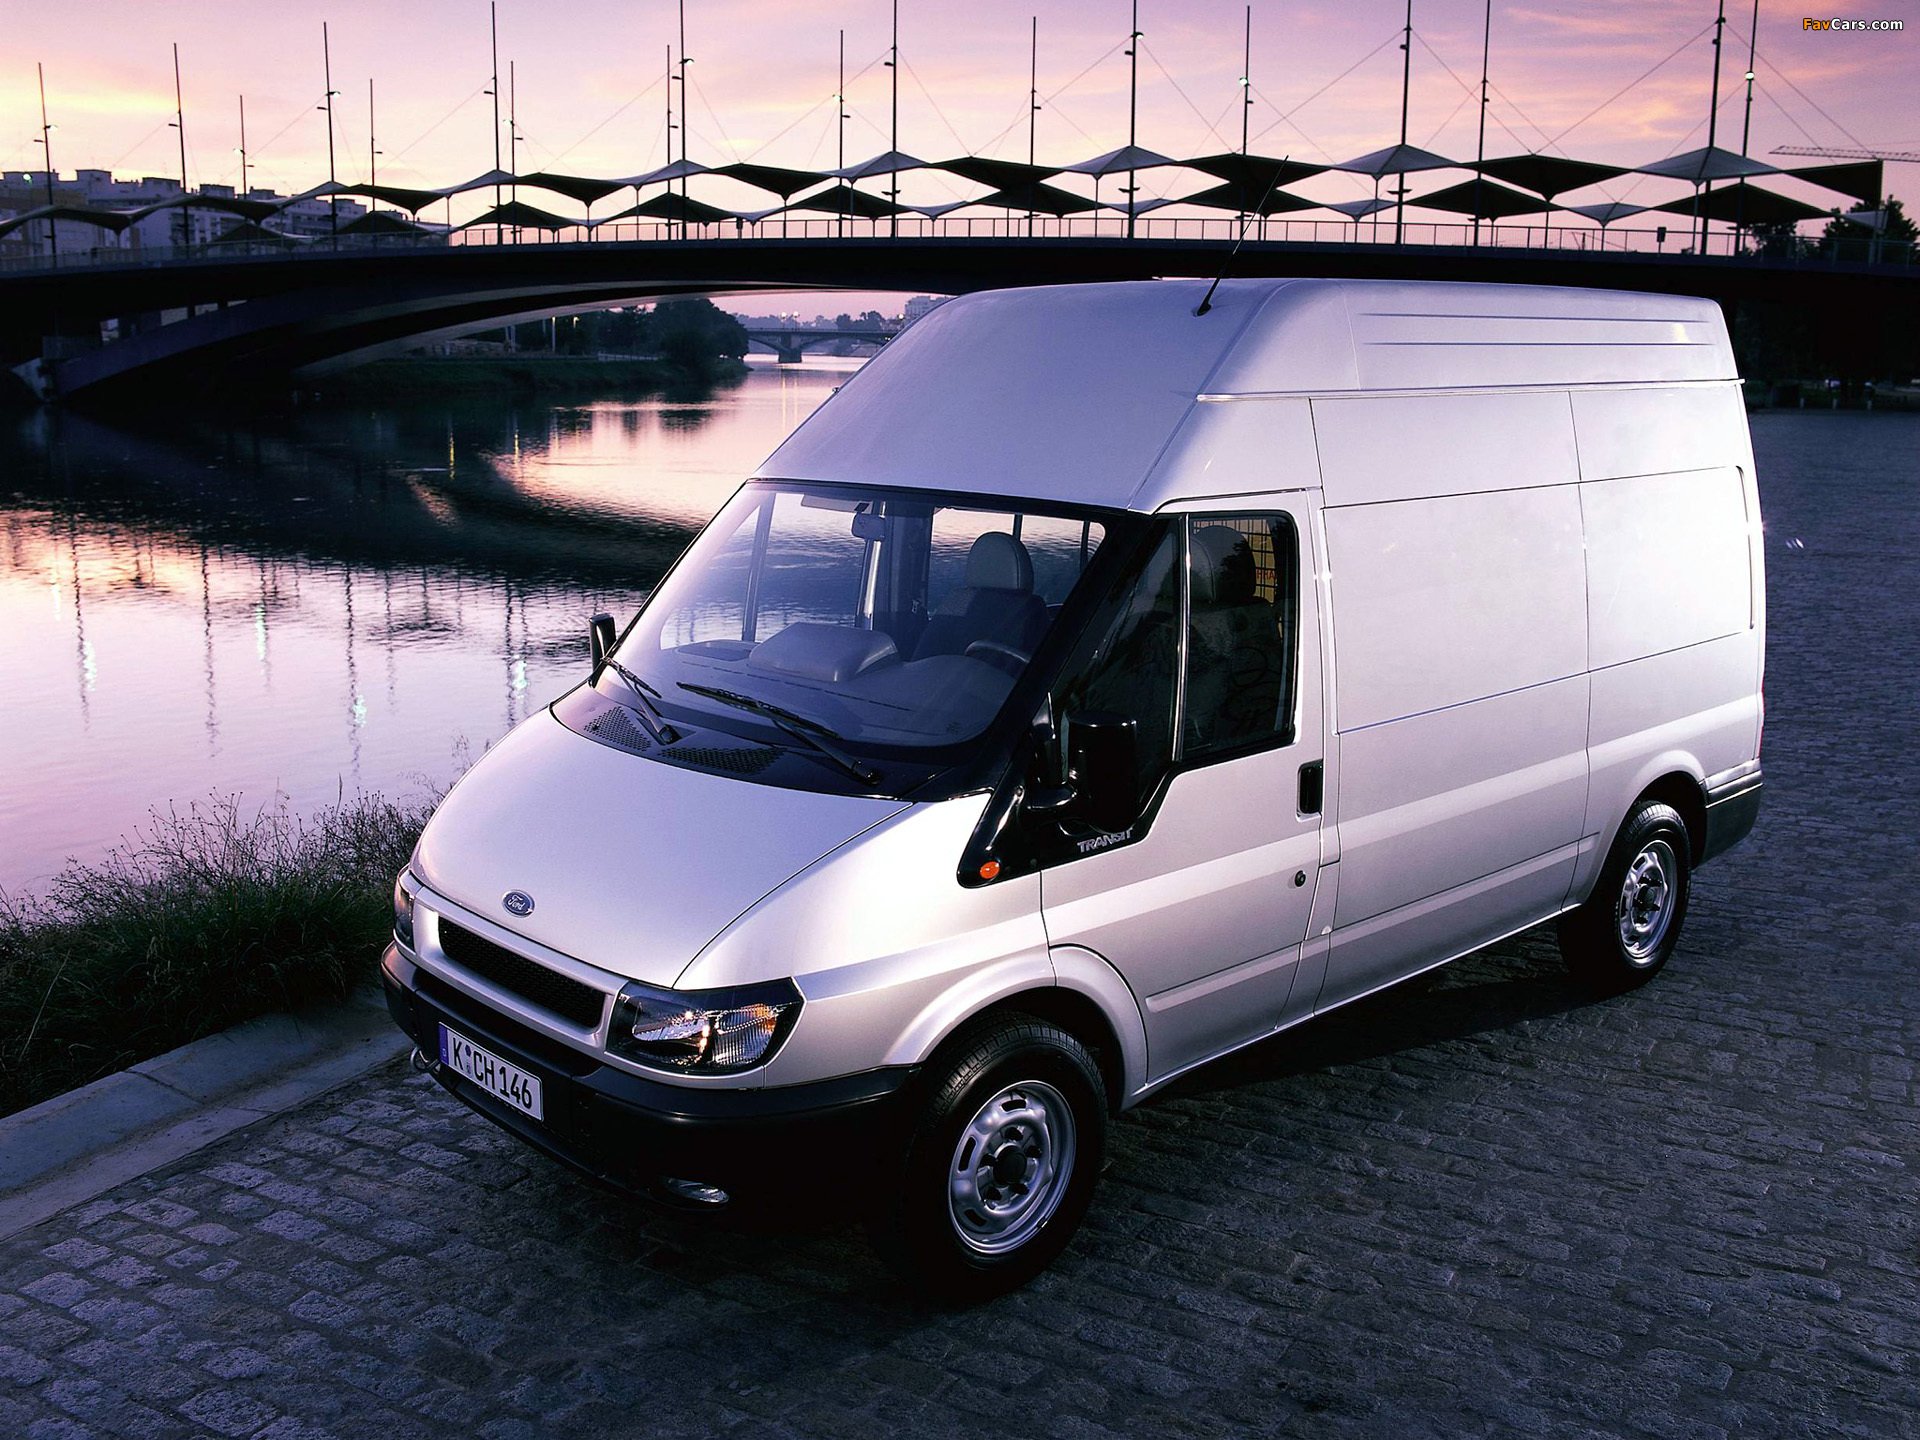 Форд транзит 2.0 2000 2006. Ford Transit 2000. Ford Transit '2000–06. Ford Transit van 2000. Ford Transit 06.